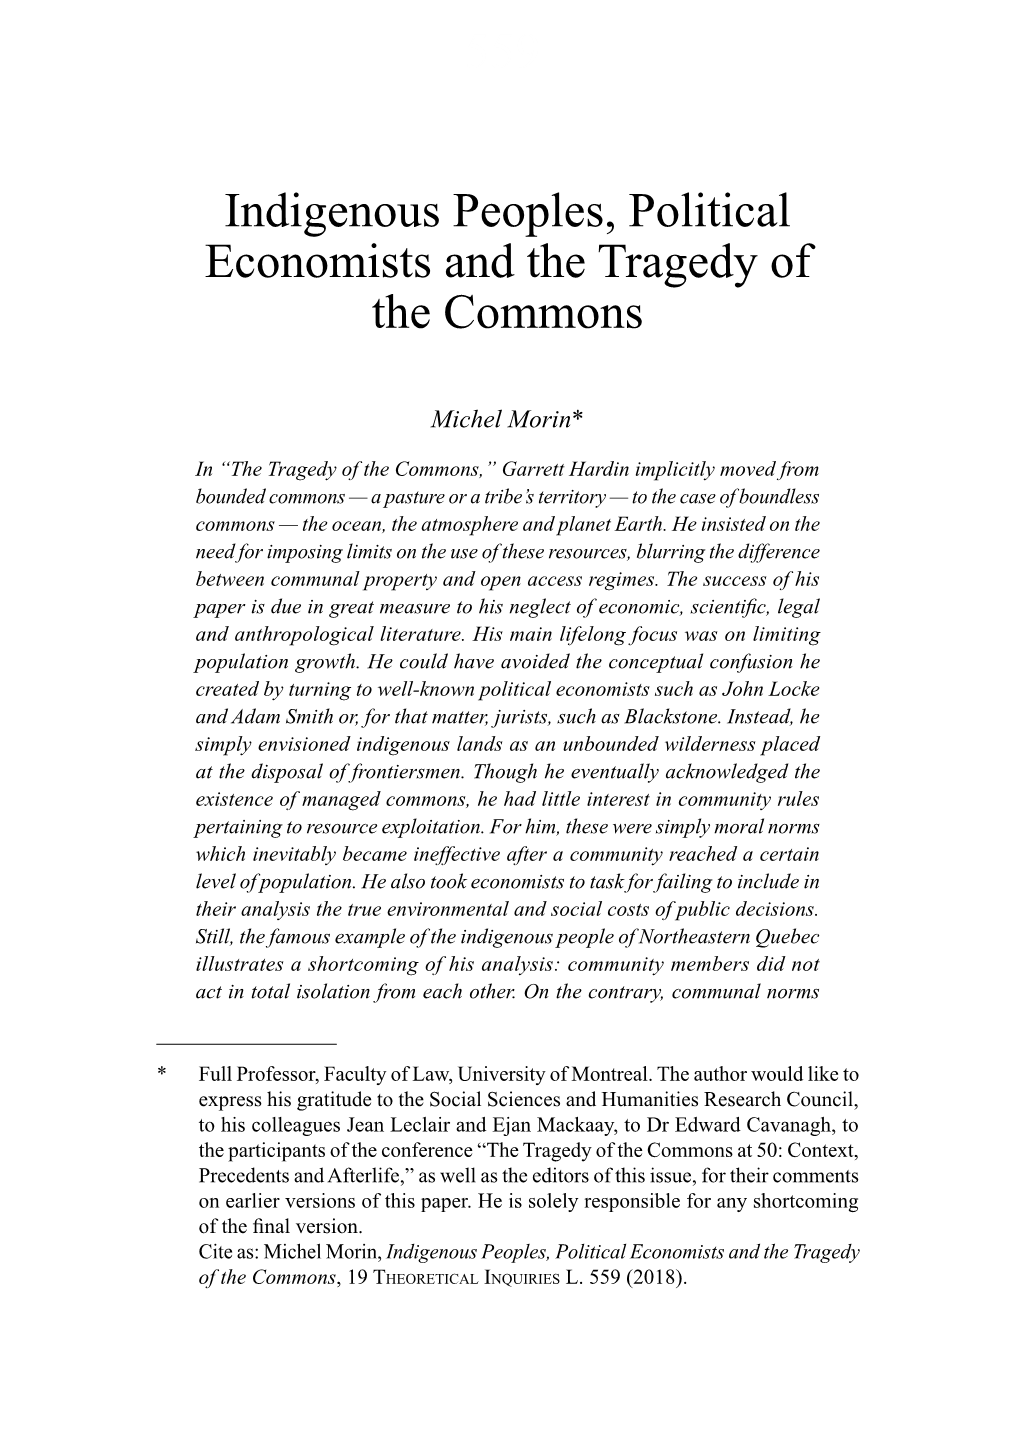 Indigenous Peoples, Political Economists and the Tragedy of the Commons